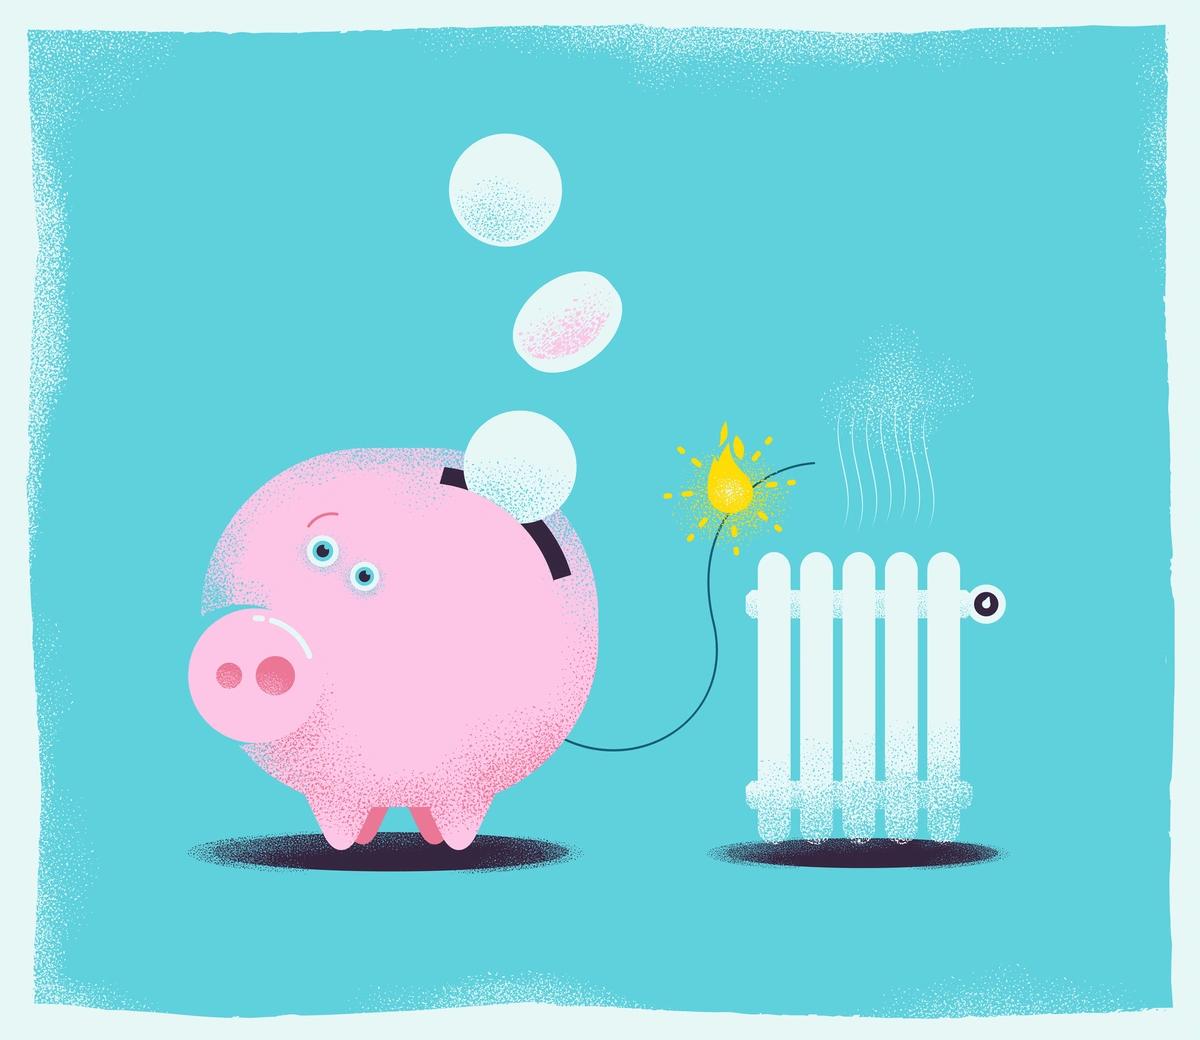 Illustration of piggy bank connected to steaming radiator to signify energy bill